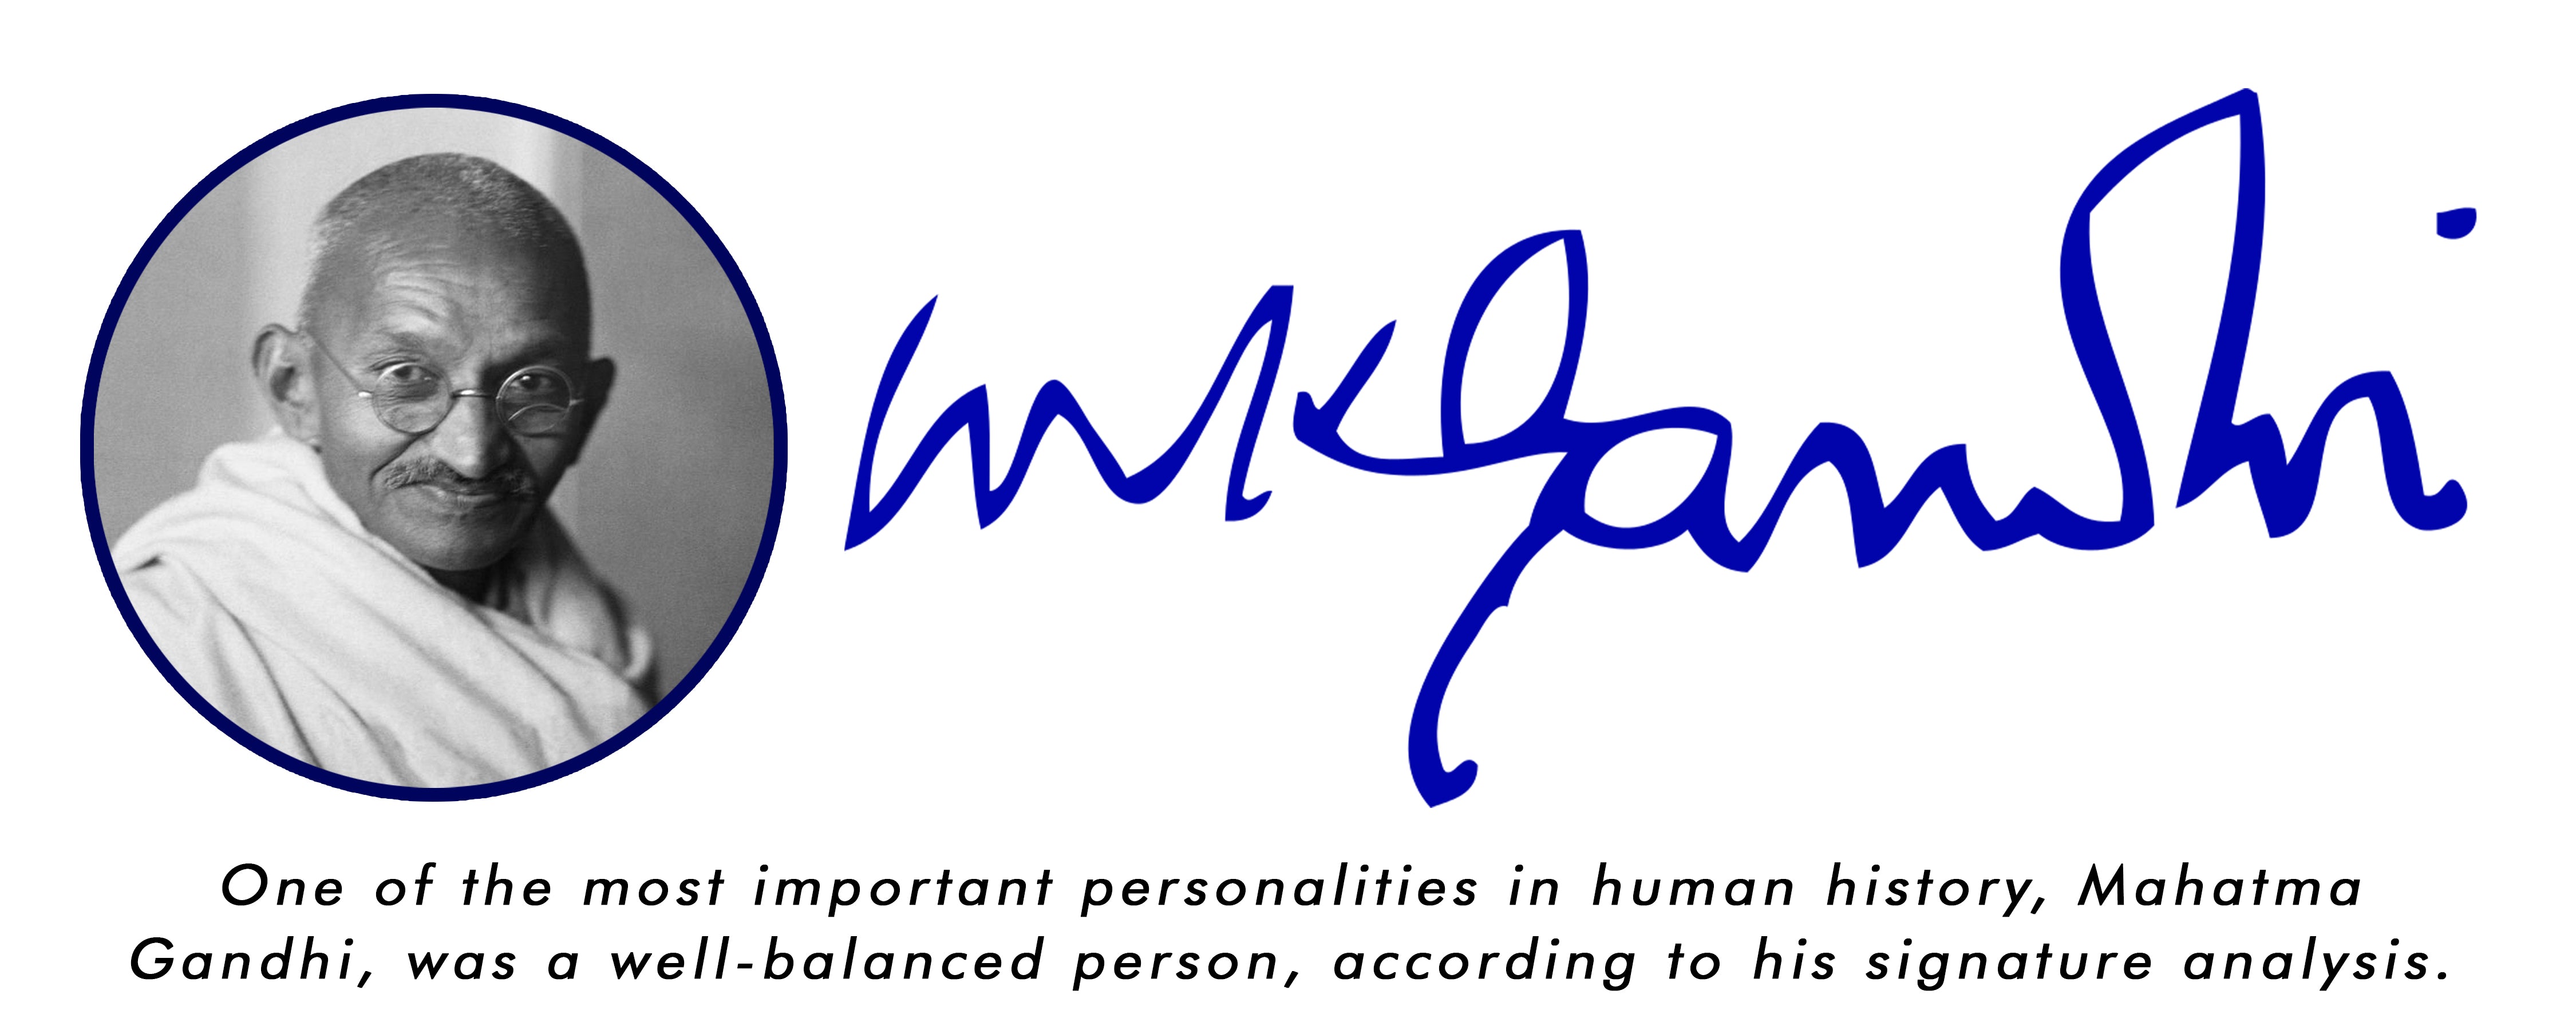 One of the most important personalities in human history, Mahatma Gandhi, was a well-balanced person, according to his signature analysis.